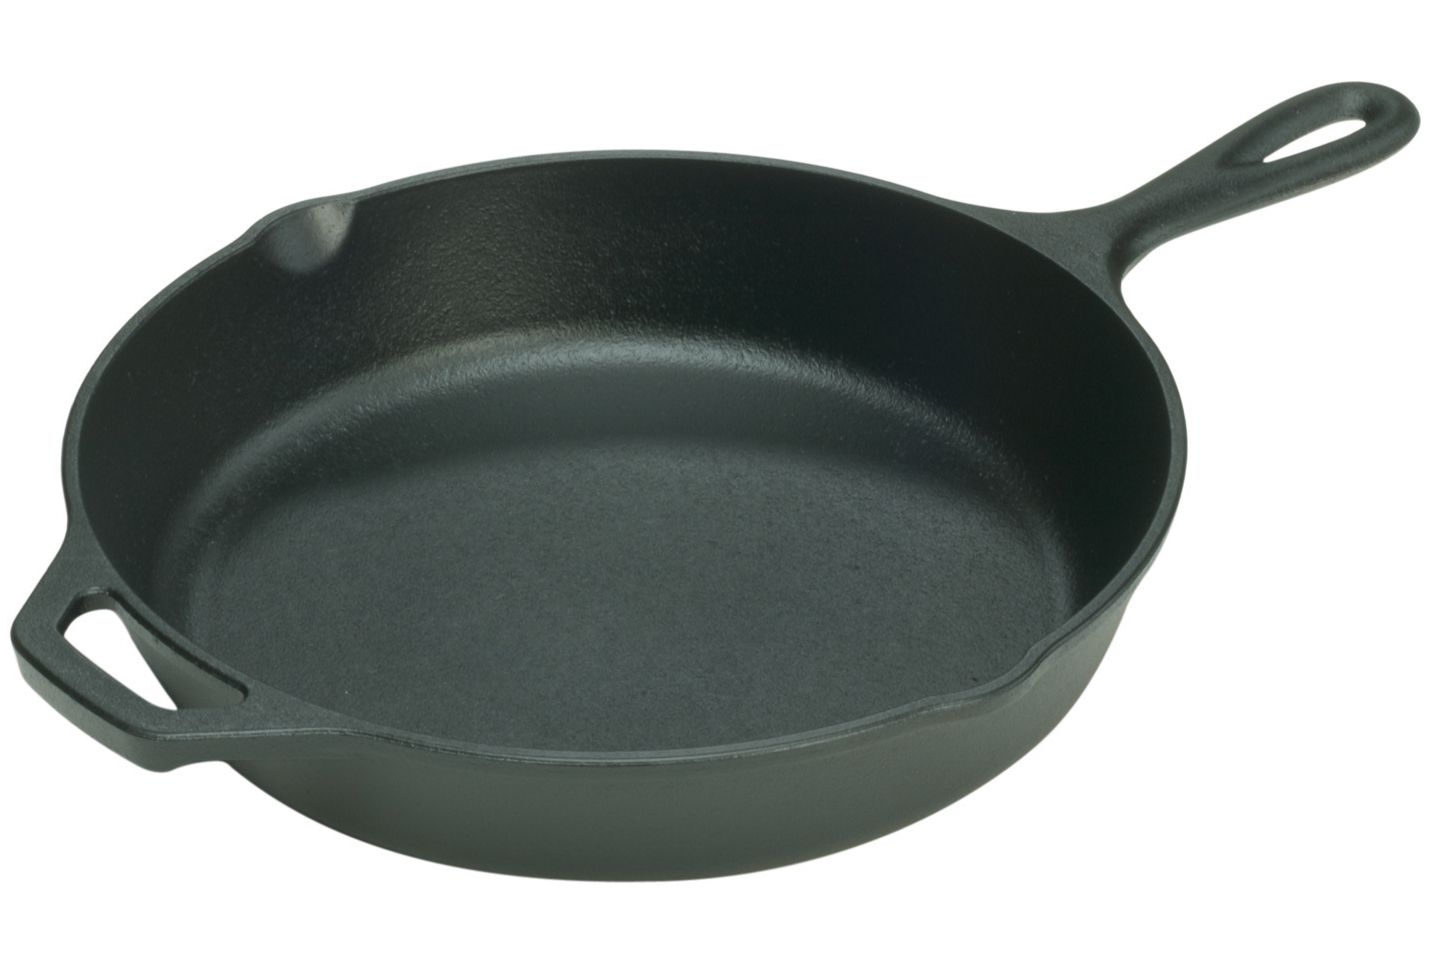 Lodge Seasoned Cast Iron 13.25" Skillet with Assist Handle